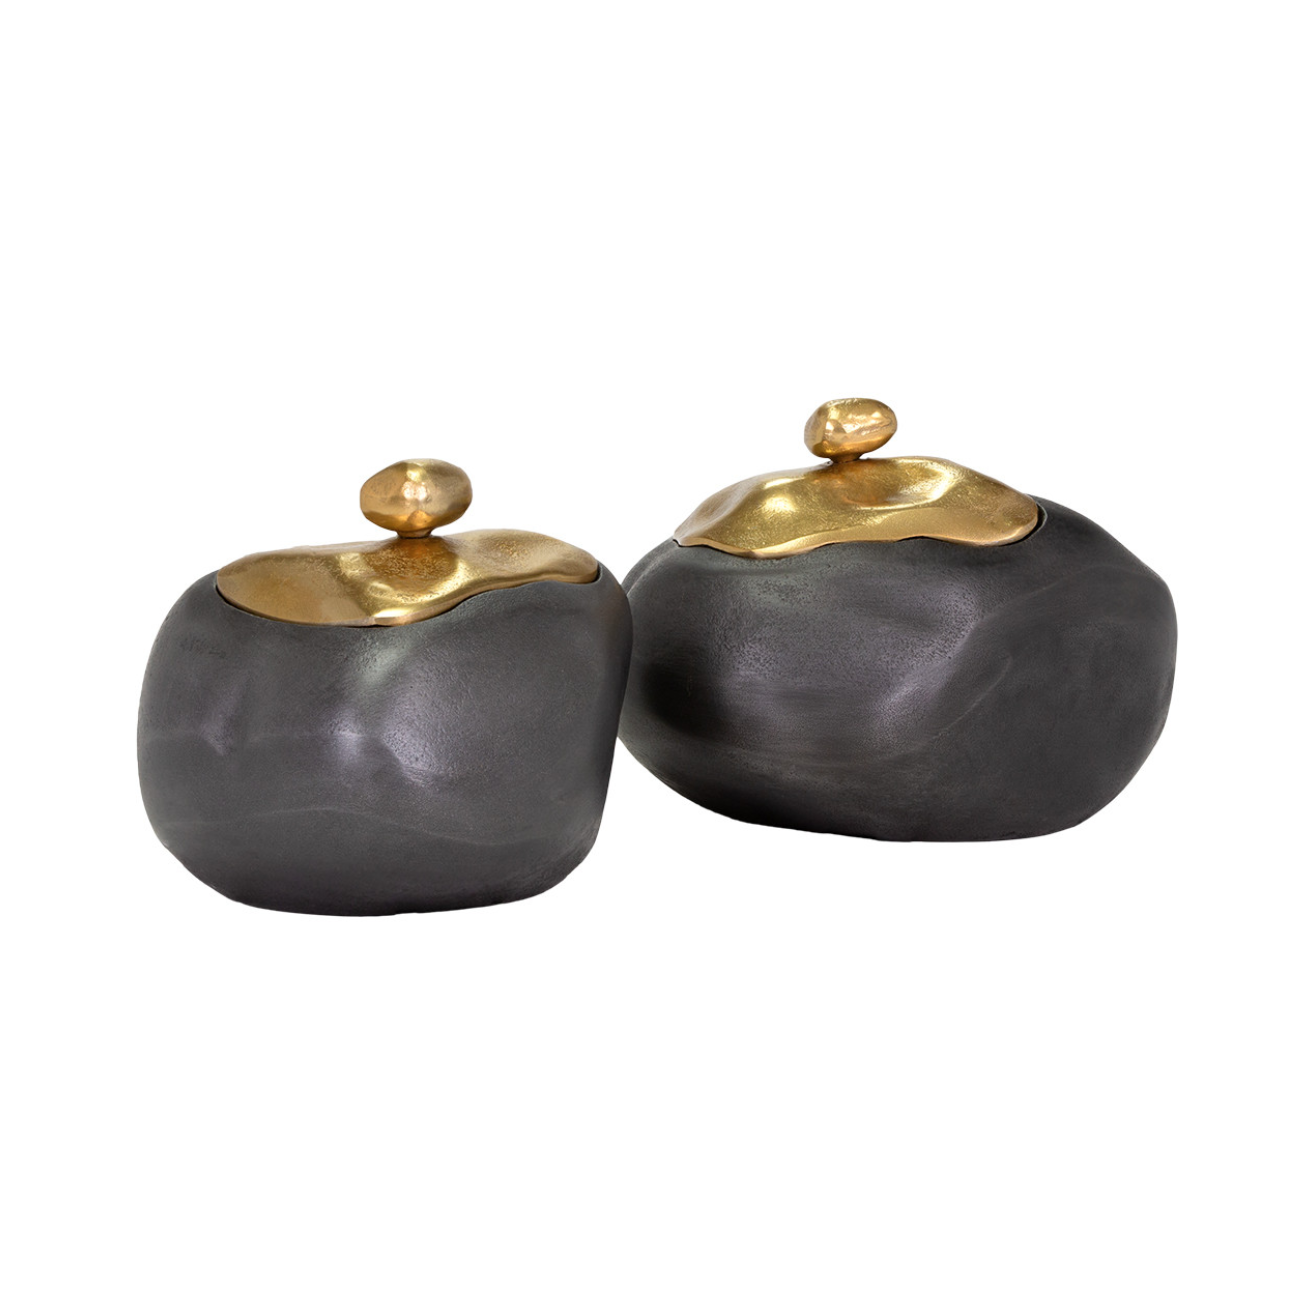 Two rounded, dark gray ceramic jars with golden lids, inspired by Scottsdale Arizona aesthetics, isolated on a white background. The Import Collection's Finkle Box.